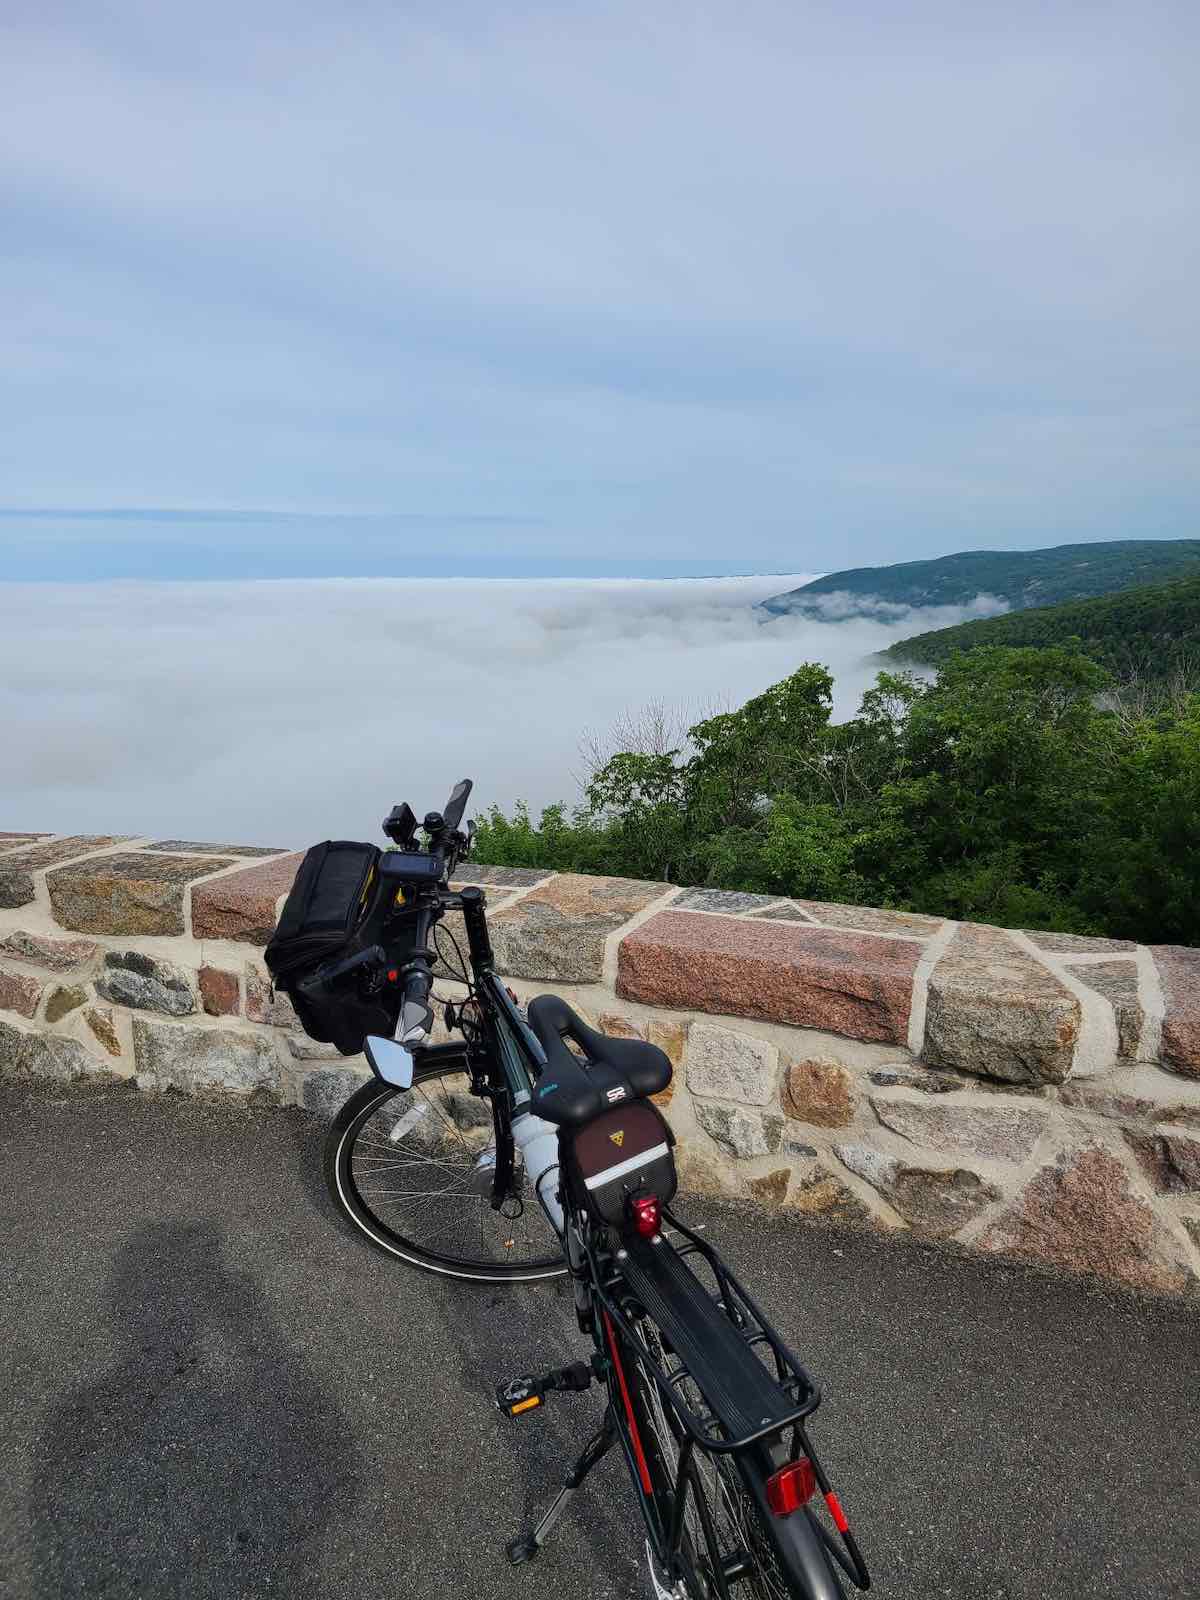 bikerumor pic of the day a bicycle is on an overlook with a stone wall looking out over a large fog covered area with trees peeking out on the right side.